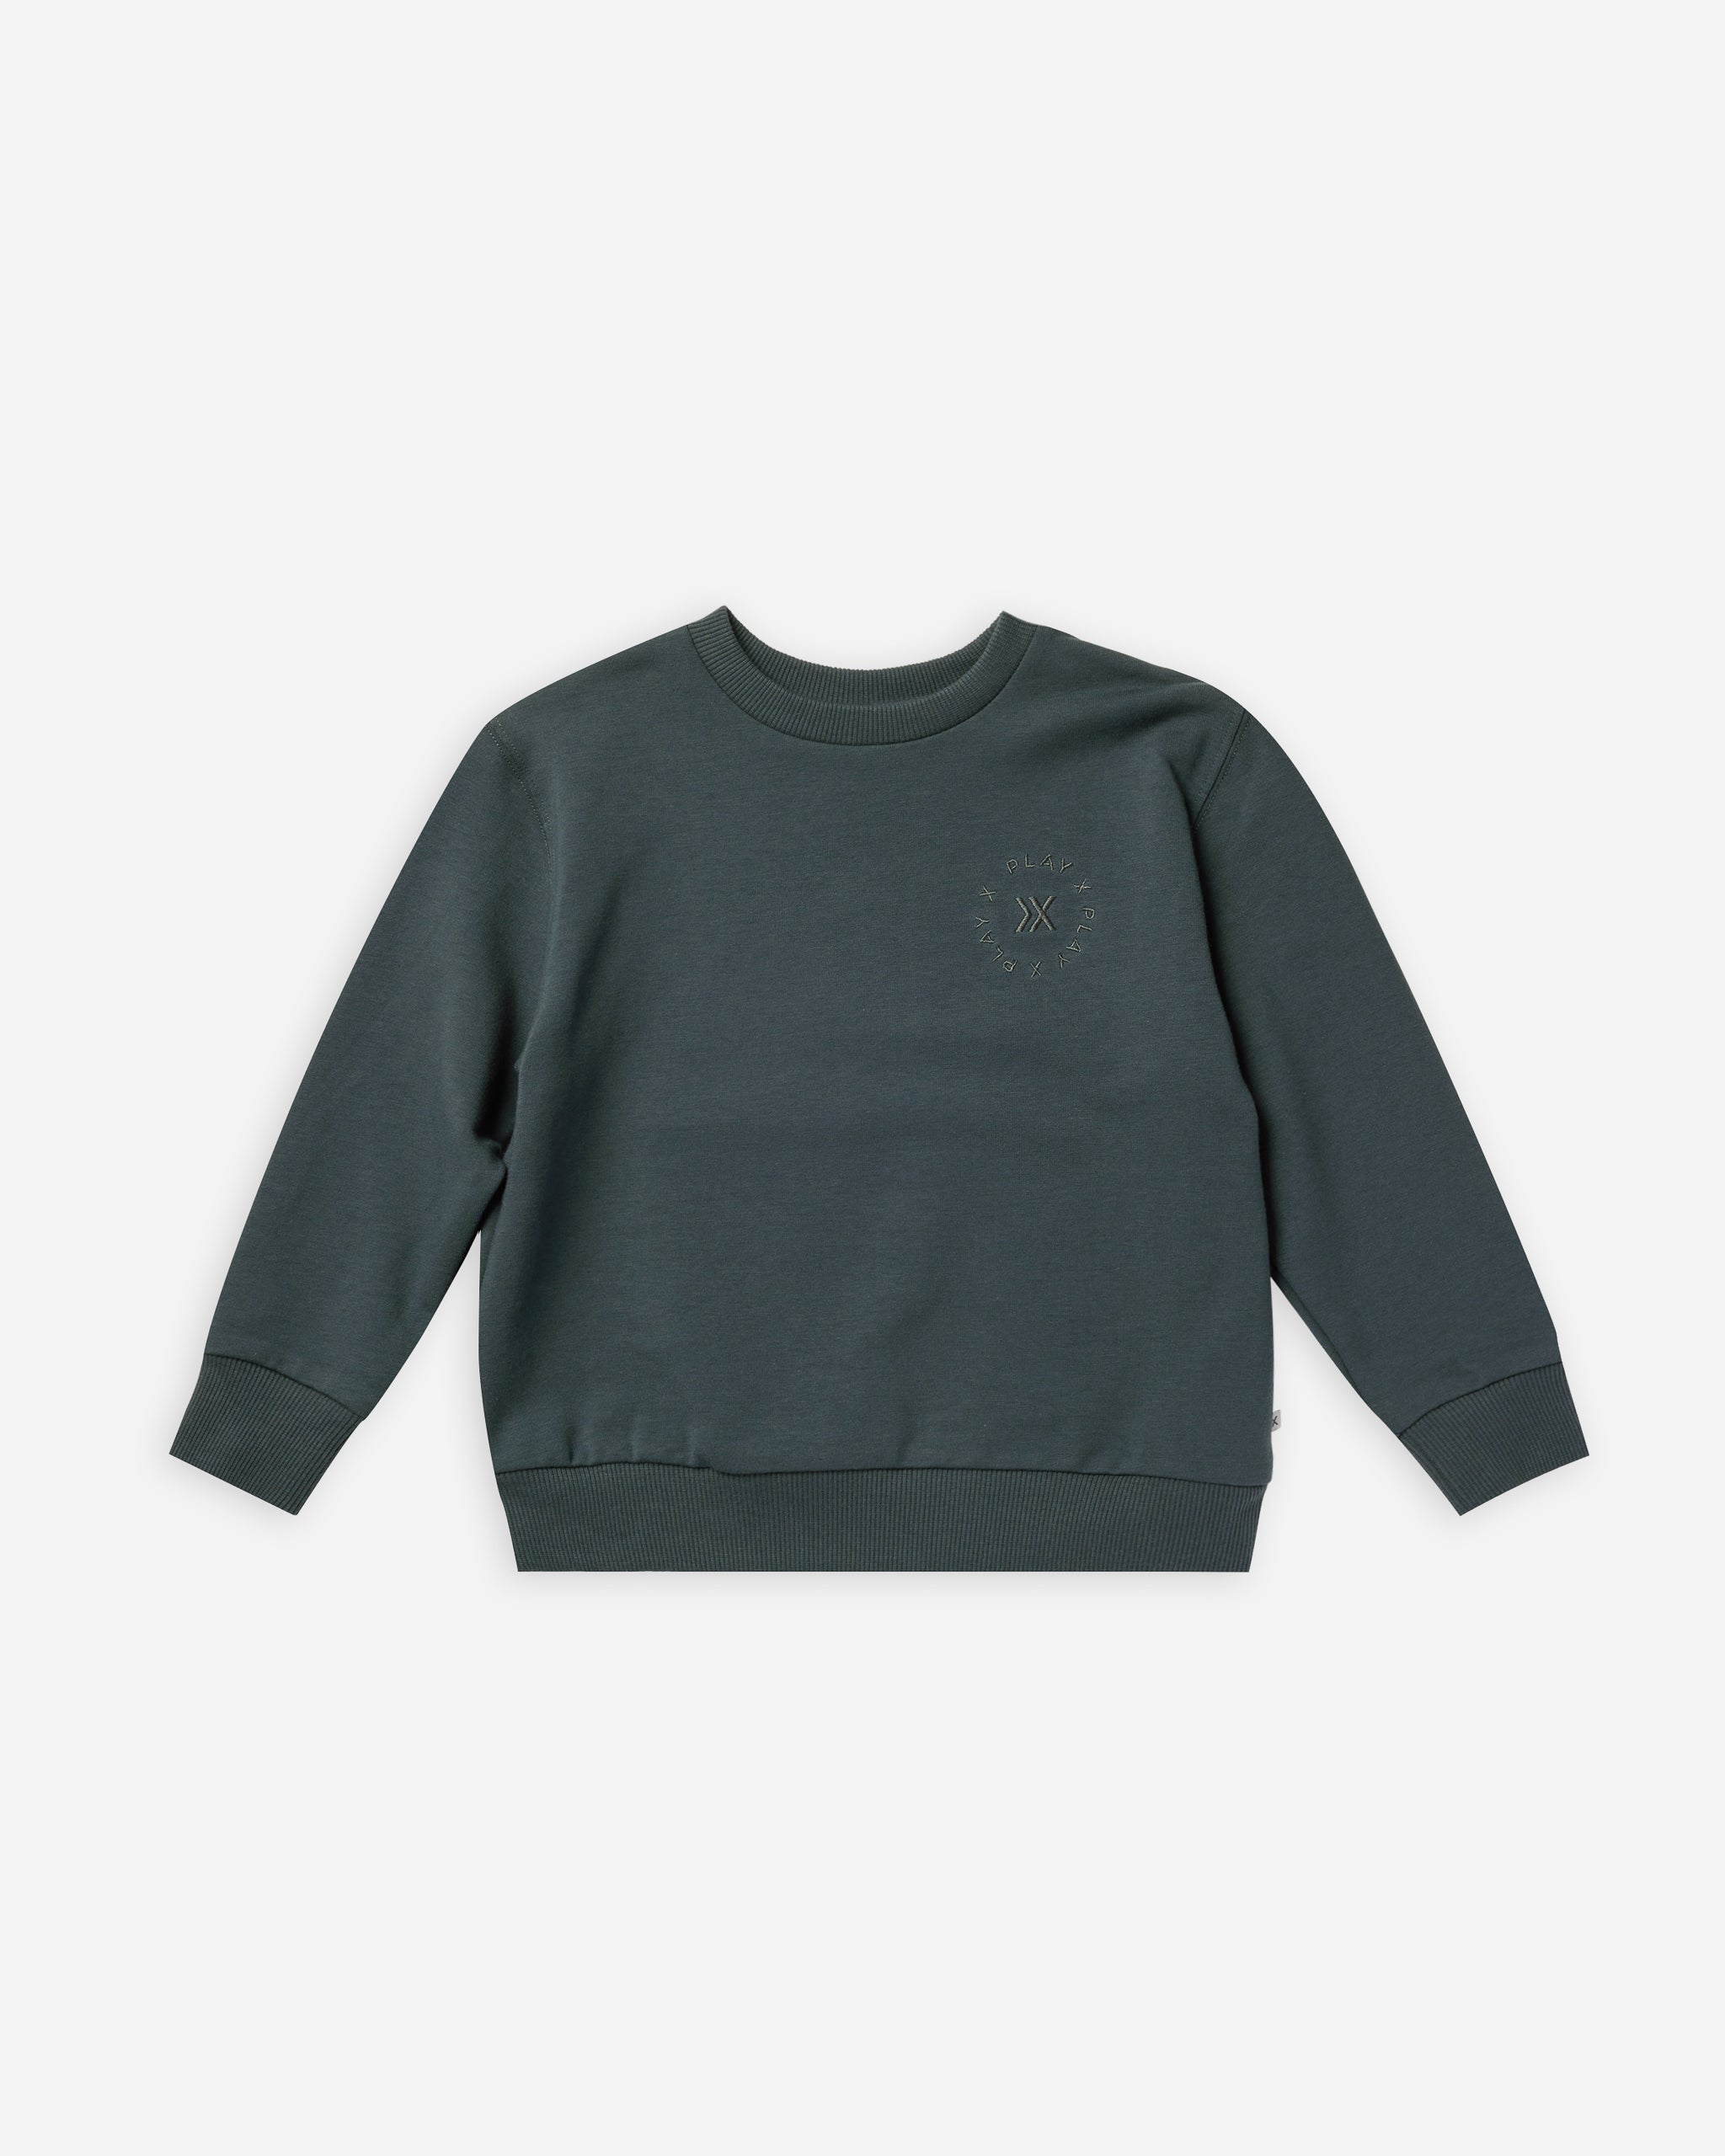 Dawn Patrol Pullover | Indigo - Rylee + Cru | Kids Clothes | Trendy Baby Clothes | Modern Infant Outfits |